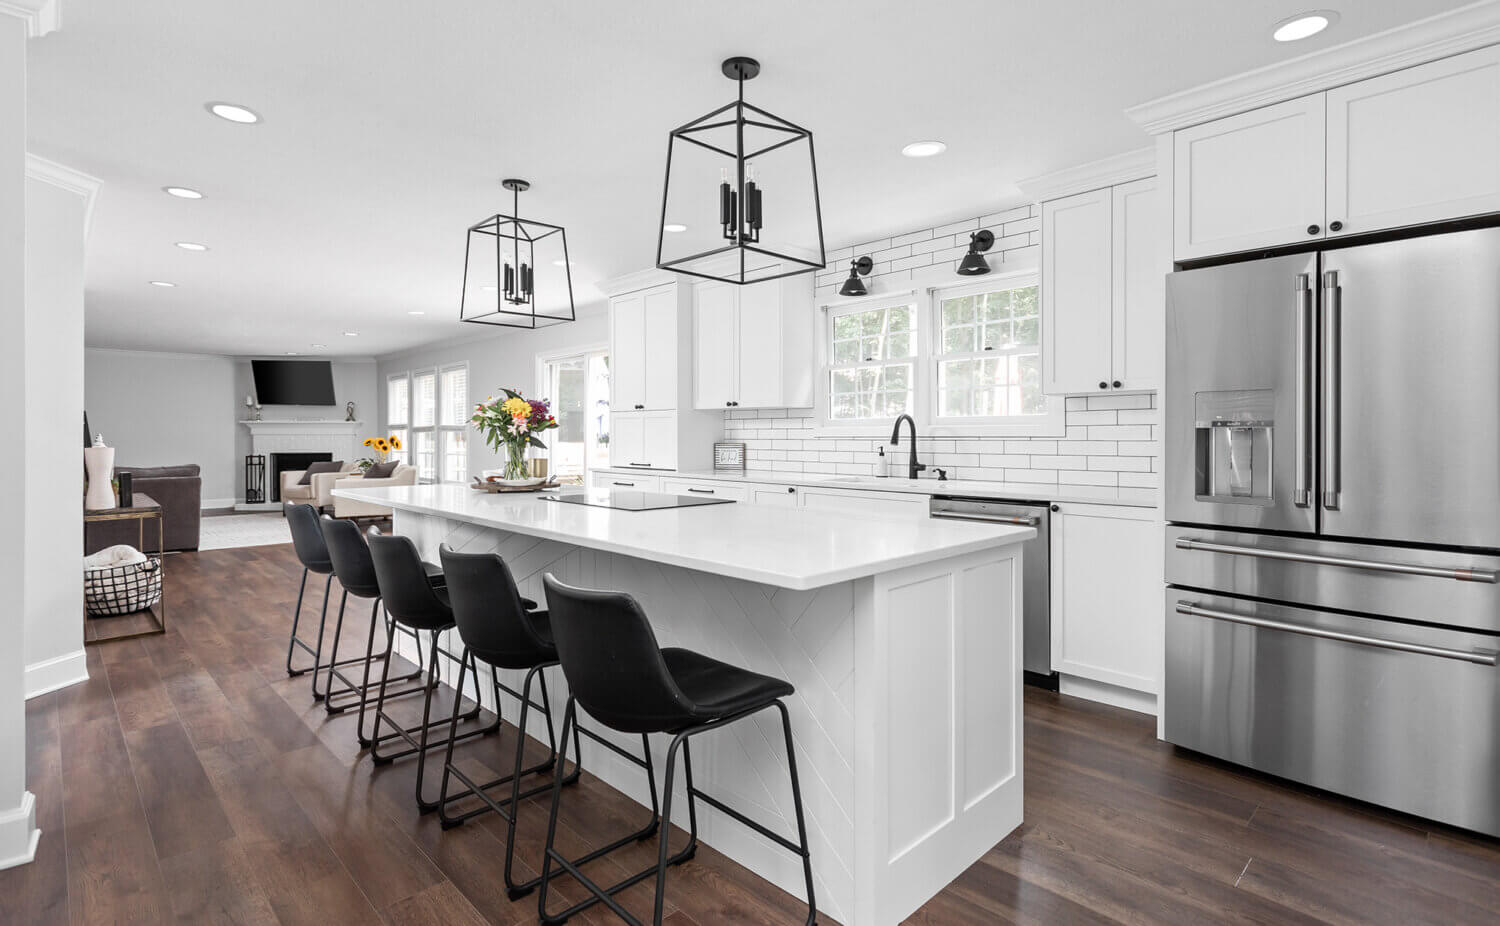 An all-white kitchen with black hardware, light fixtures, and bar stools. The back panel of the kitchen island features a unique shiplap pattern.